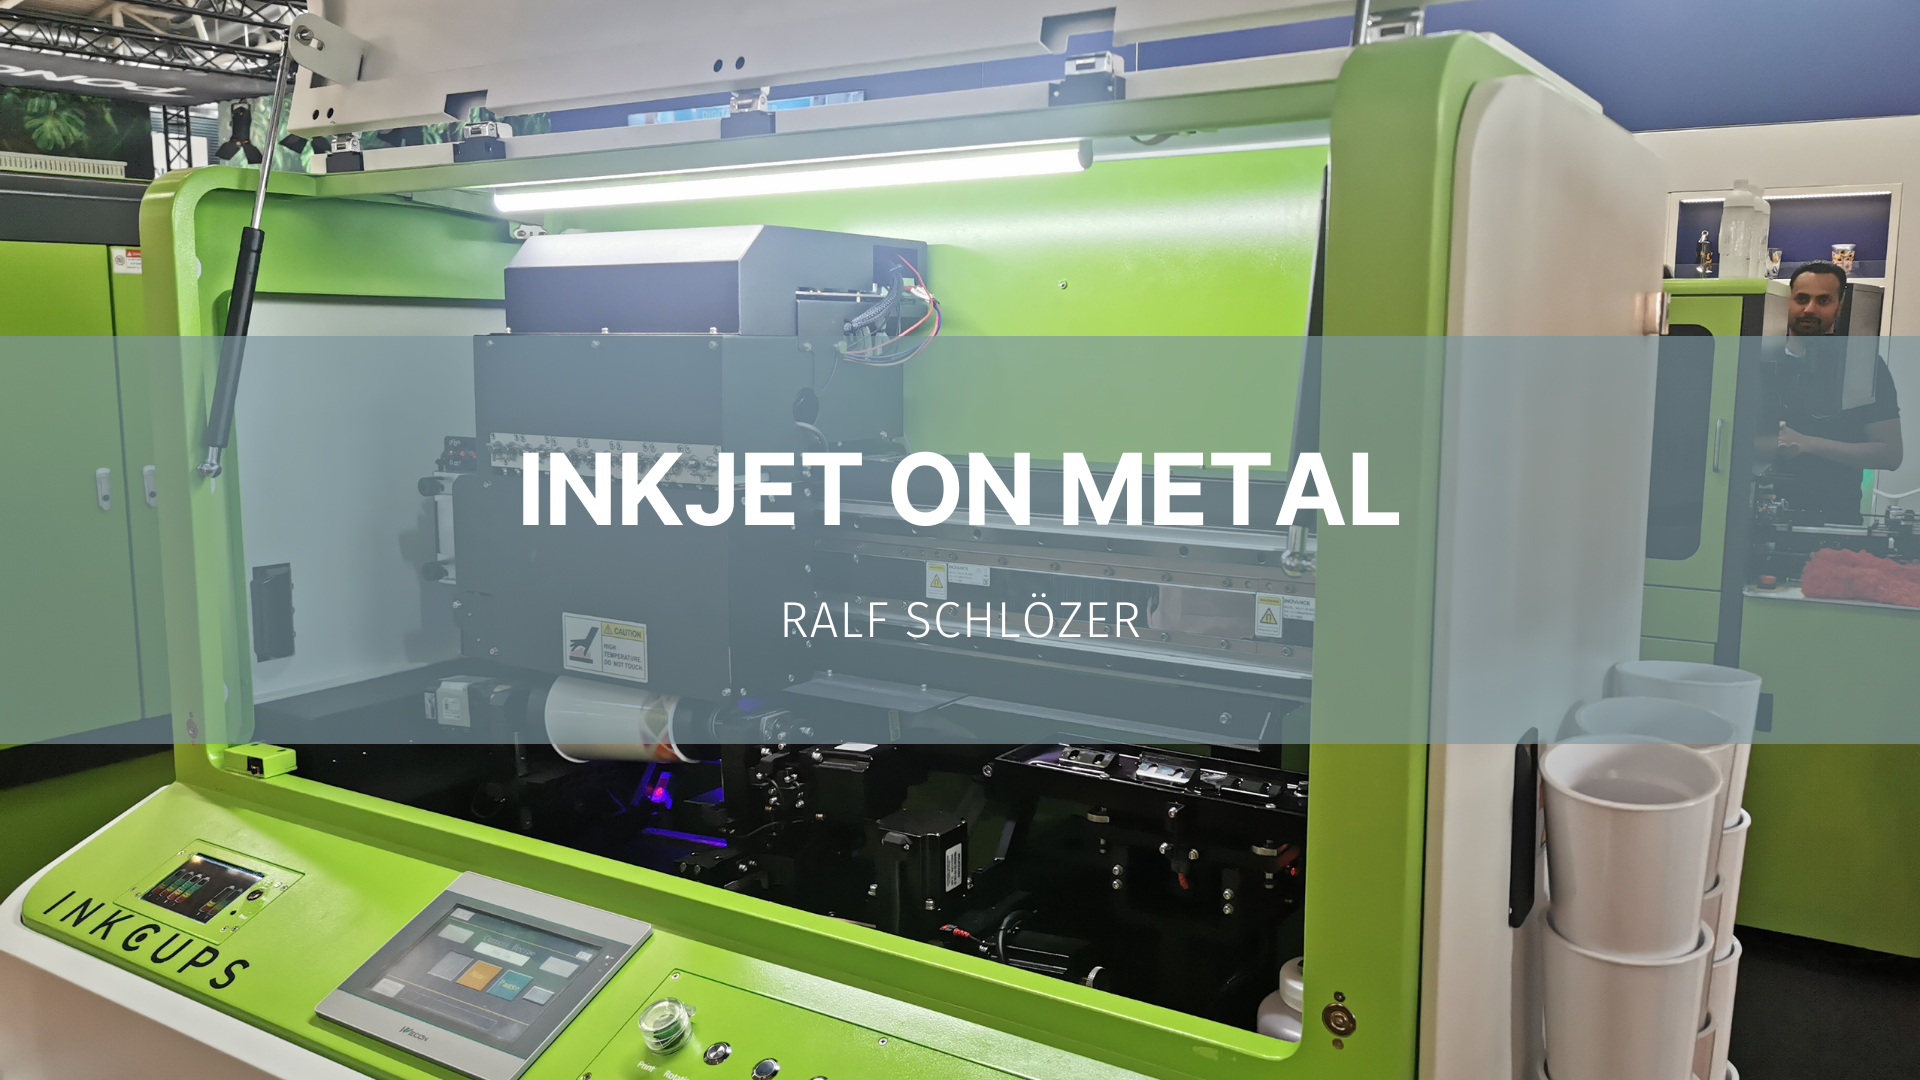 Featured image for “Inkjet on Metal”